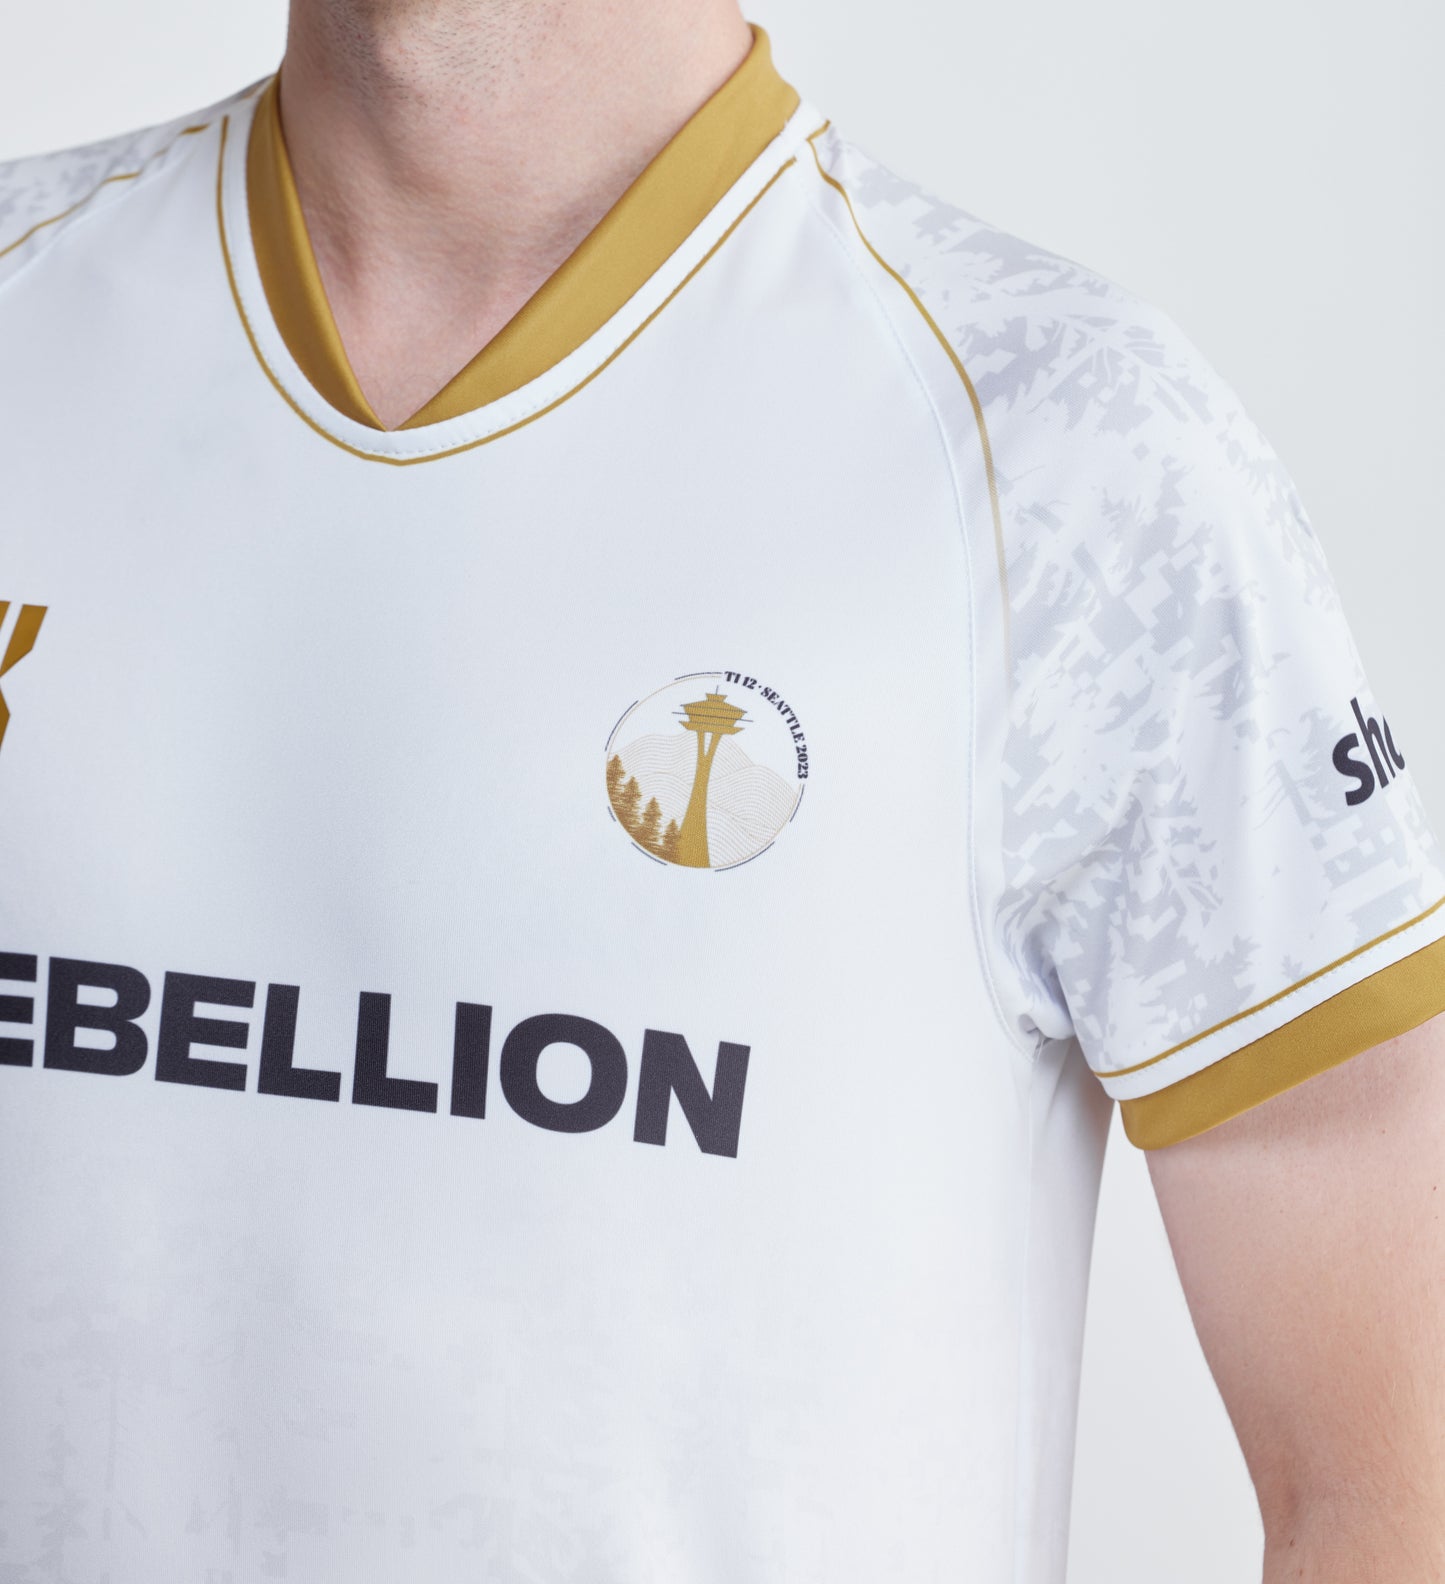 Limited Edition The International Jersey